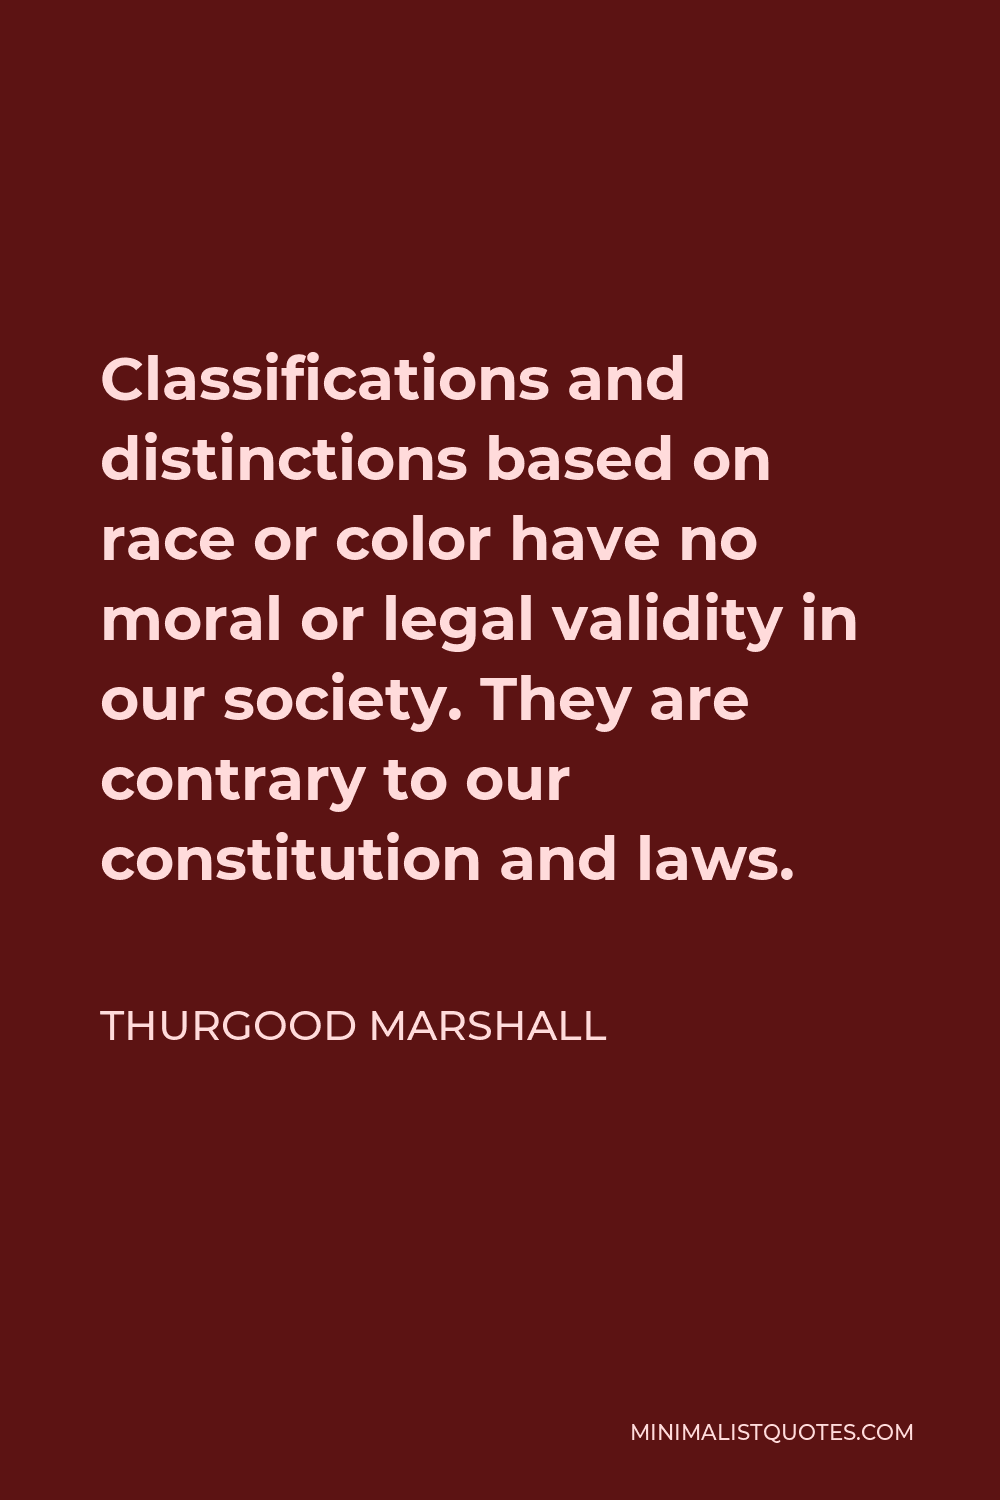 Thurgood Marshall Quote - Classifications and distinctions based on race or color have no moral or legal validity in our society. They are contrary to our constitution and laws.